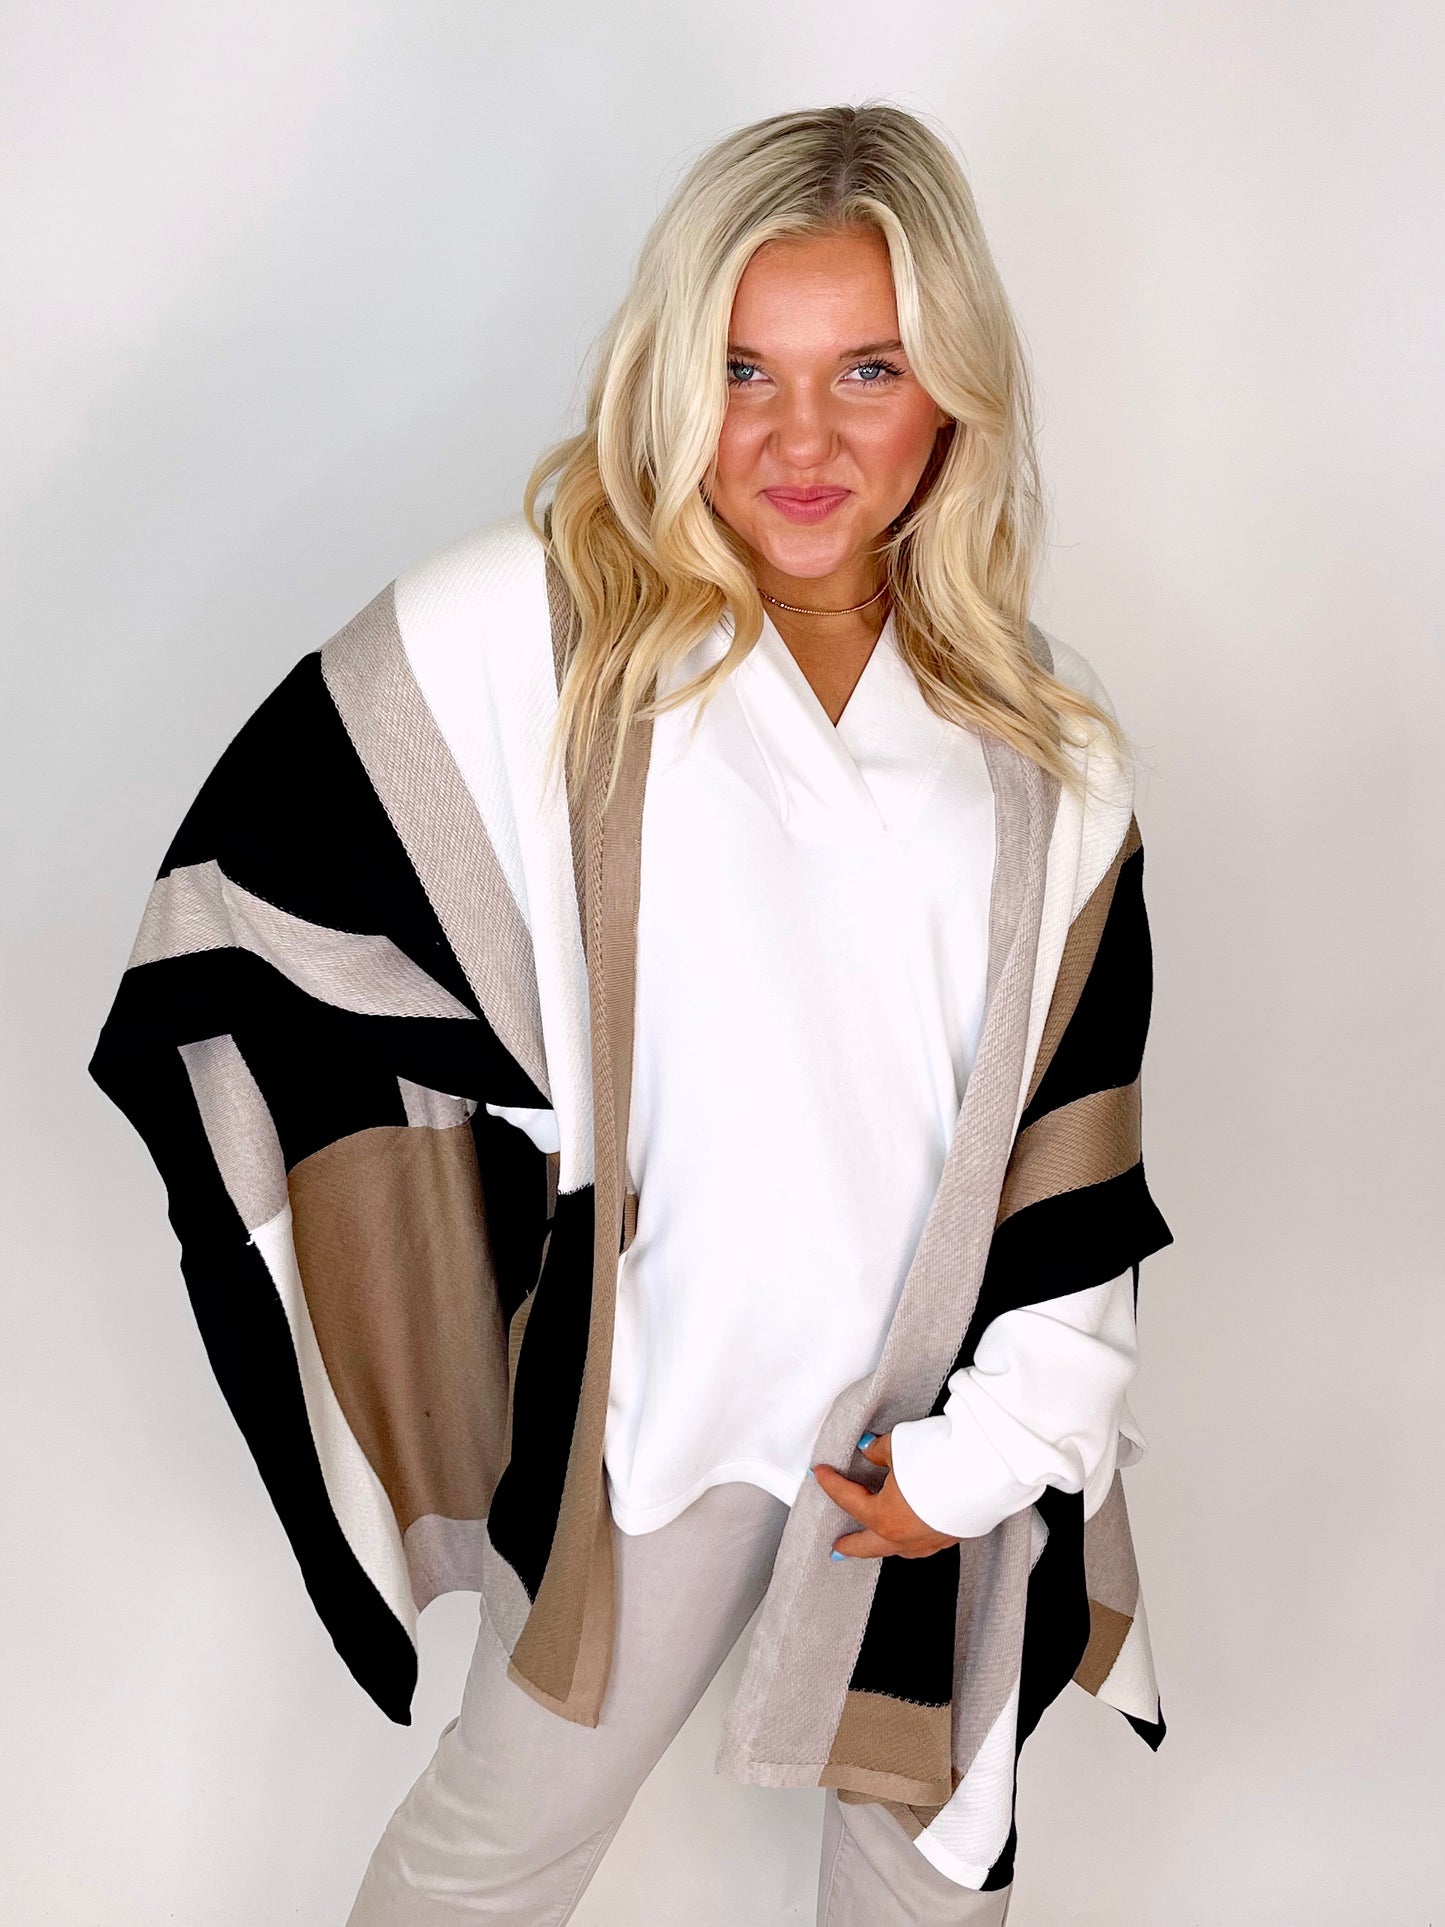 Poncho Cape Sweater | Tribal-Poncho-Tribal-The Village Shoppe, Women’s Fashion Boutique, Shop Online and In Store - Located in Muscle Shoals, AL.